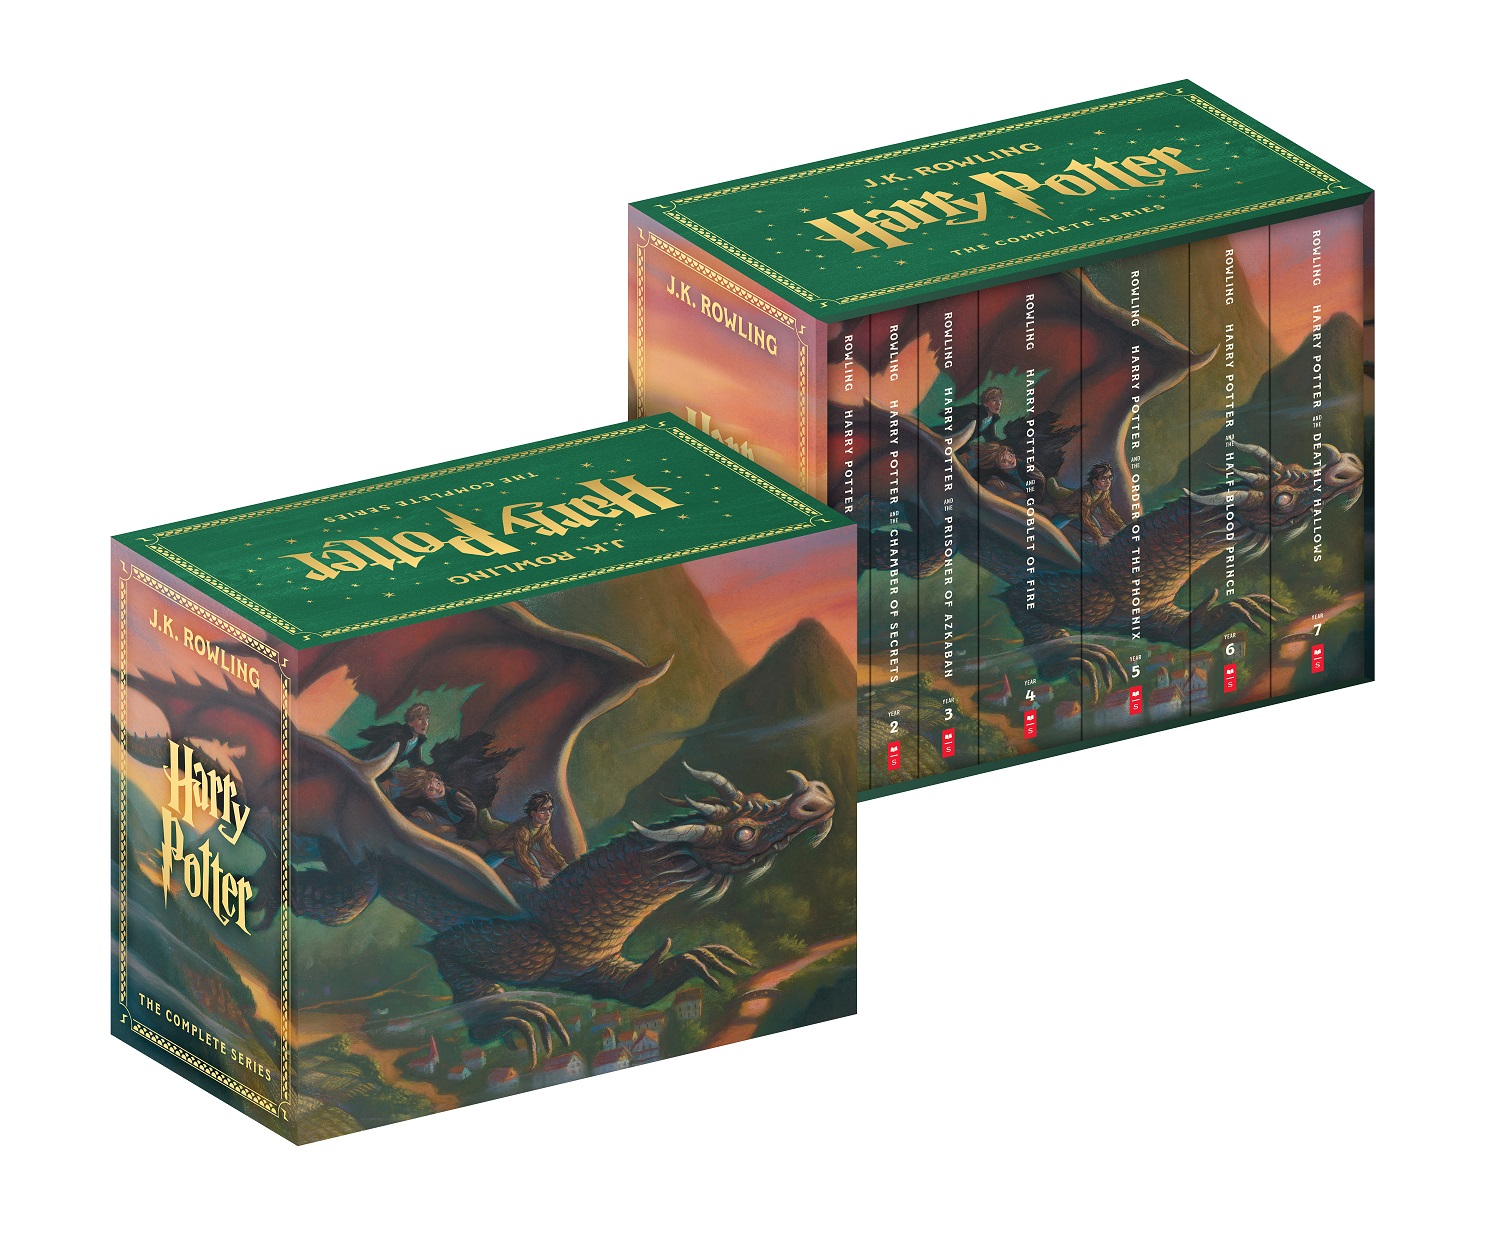 Scholastic "Harry Potter" 25th-anniversary boxed set, front and back